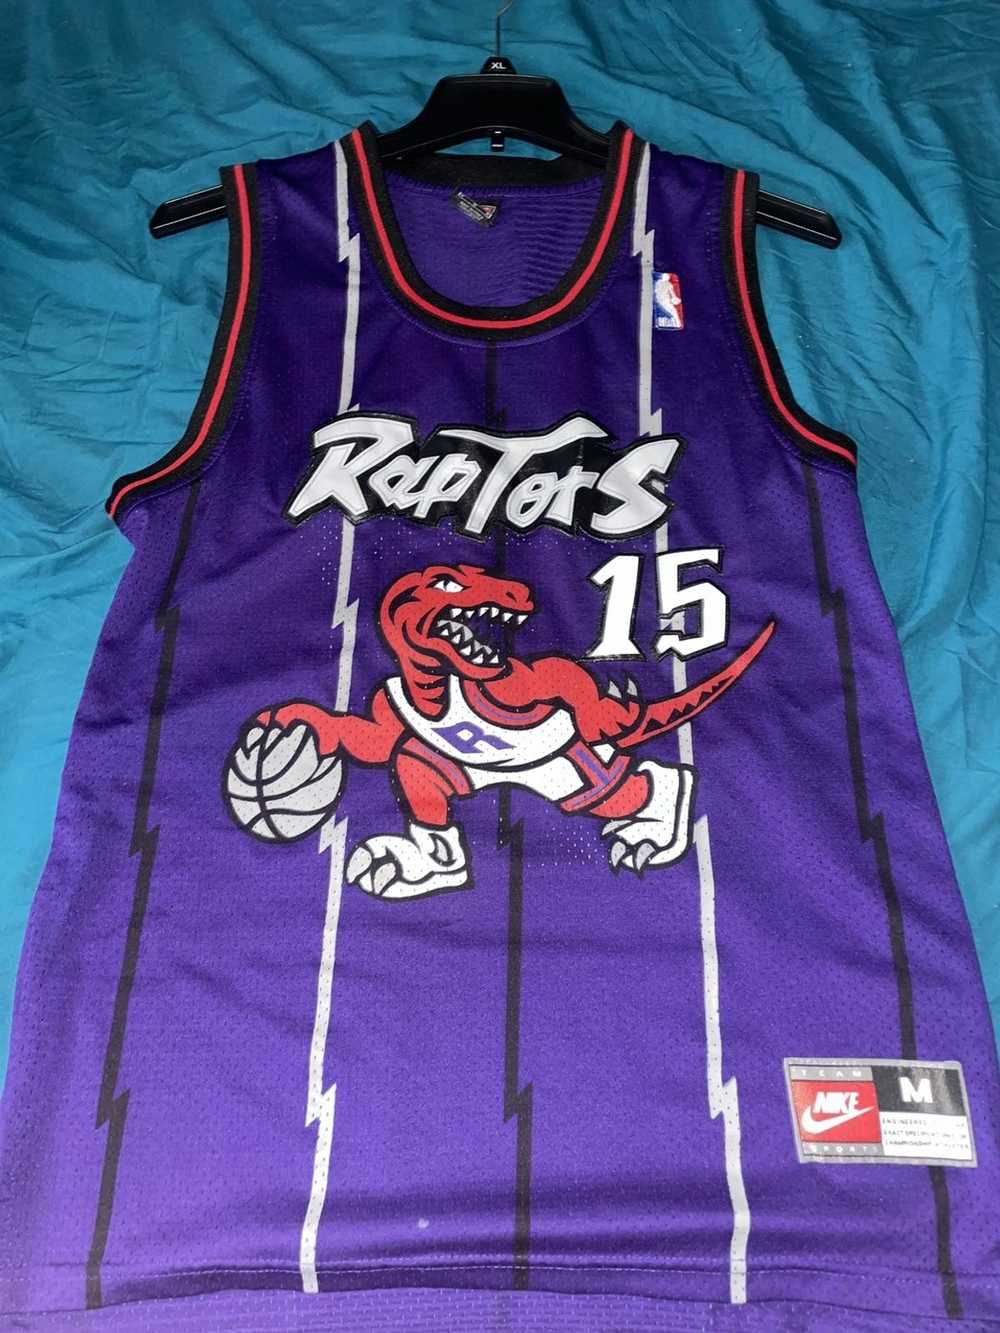 Thrifted Vince Carter NBA Jersey - image 1